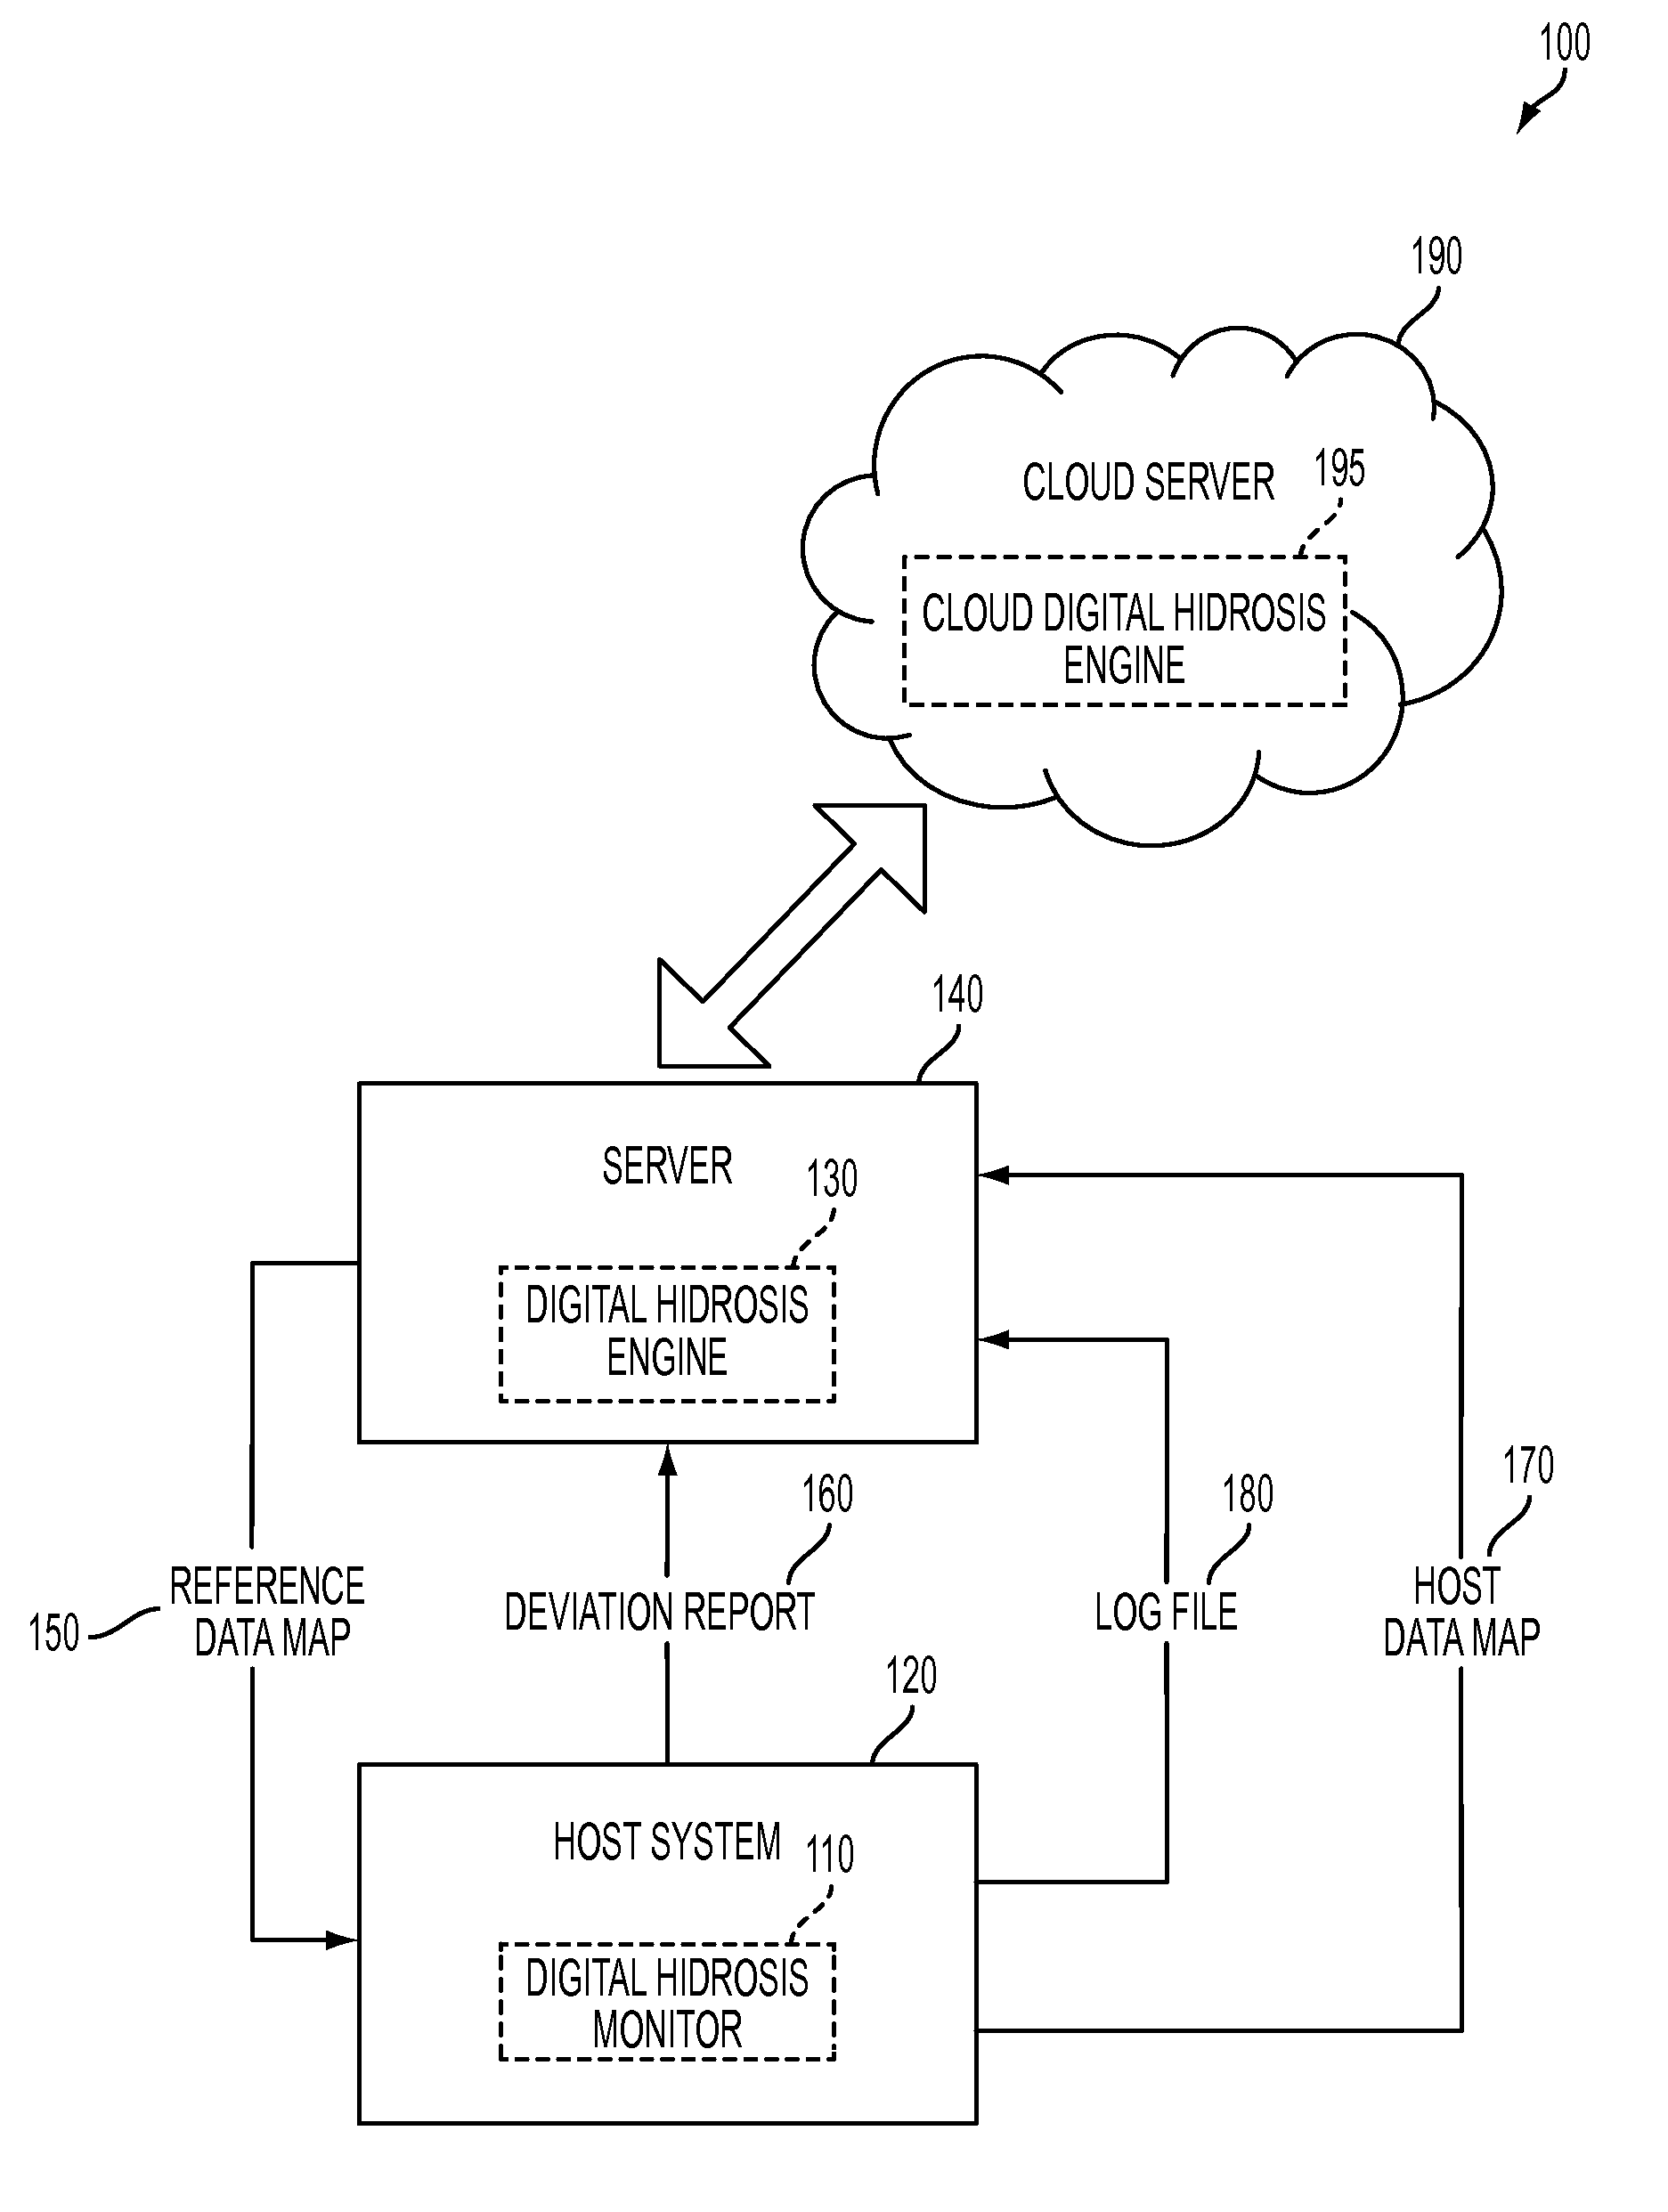 System and method for detecting potential threats by monitoring user and system behavior associated with computer and network activity